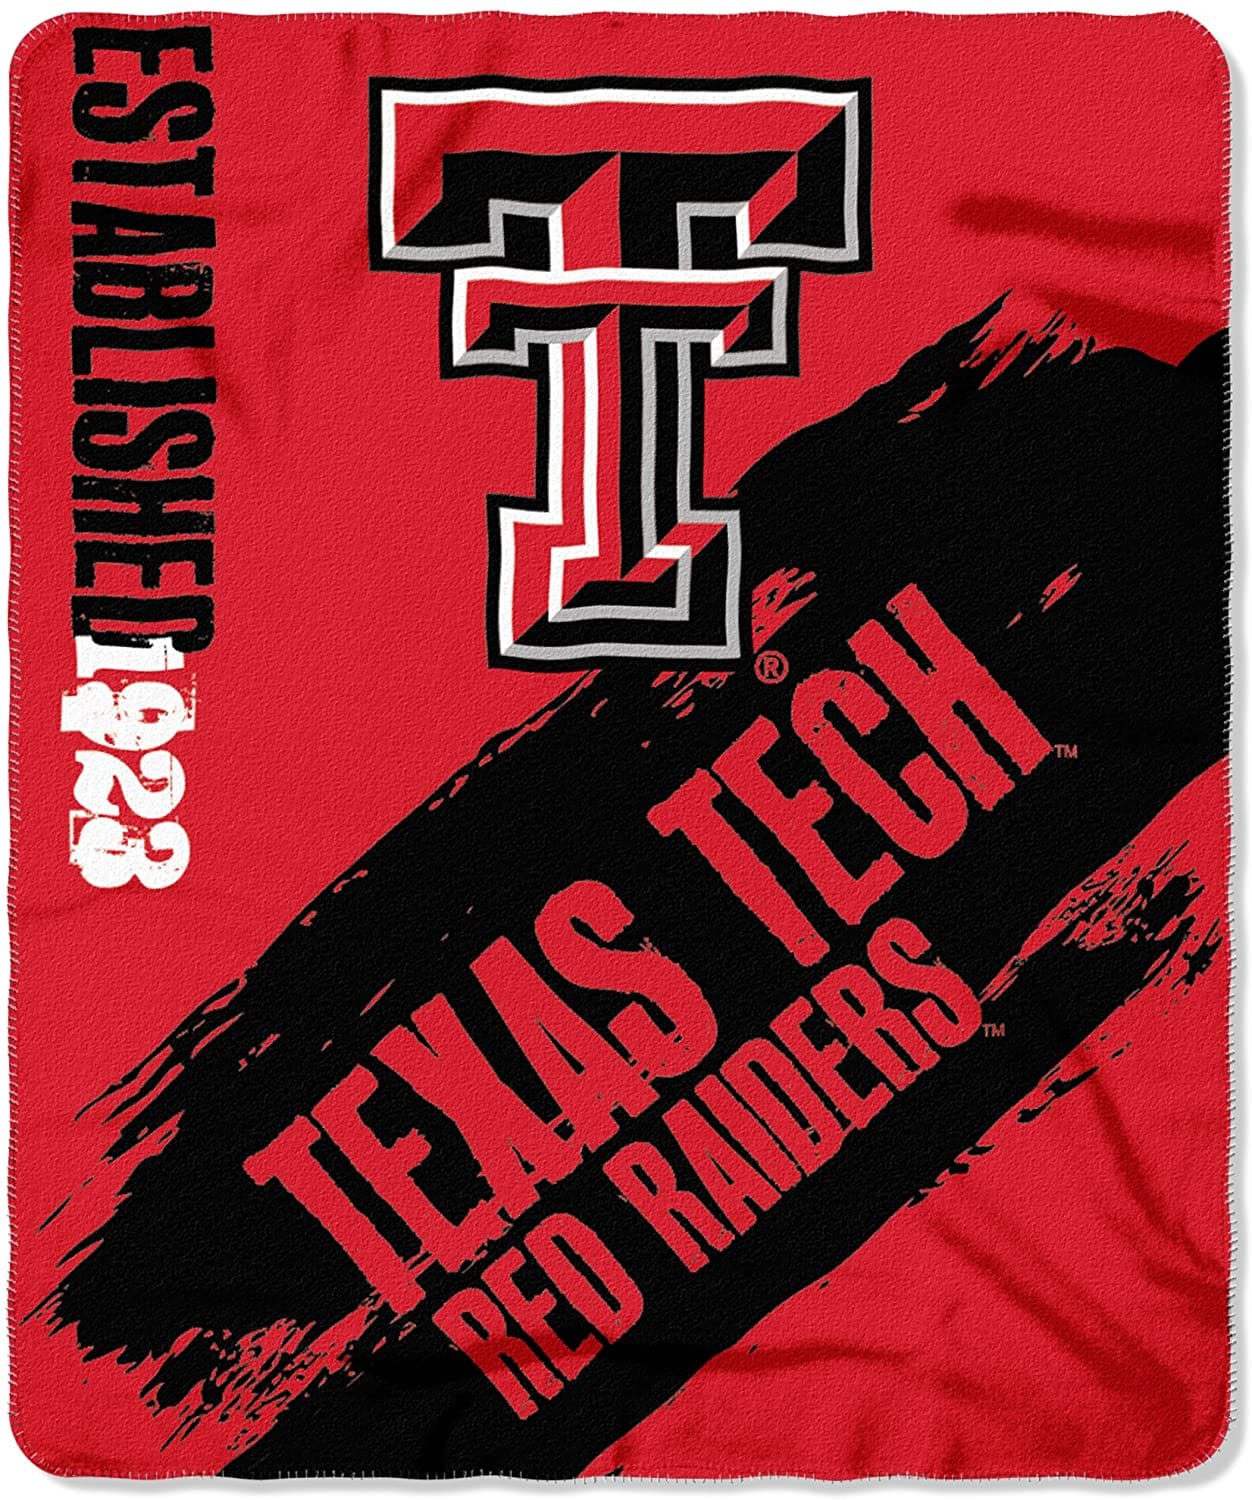 Officially Licensed Ncaa Printed Throw Texas Tech Red Raiders Fleece Blanket